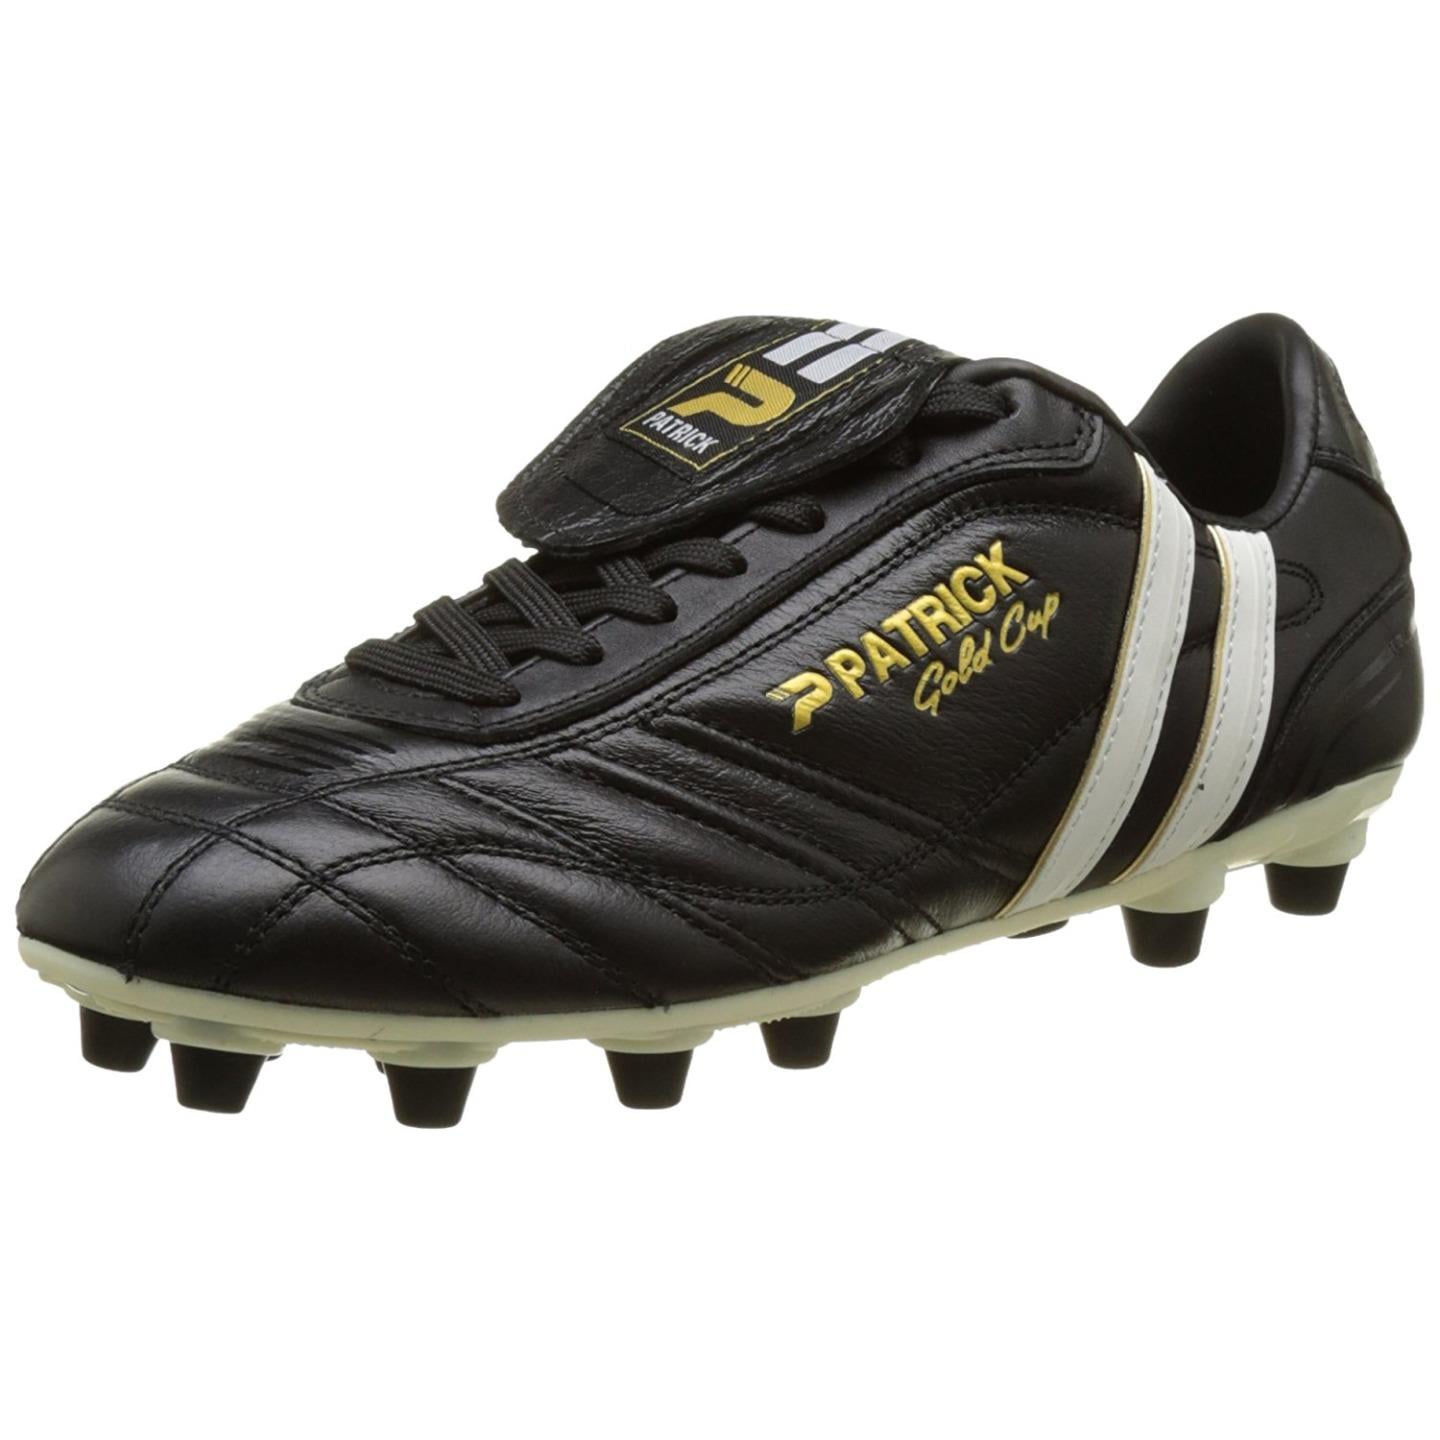 patrick gold cup football boots